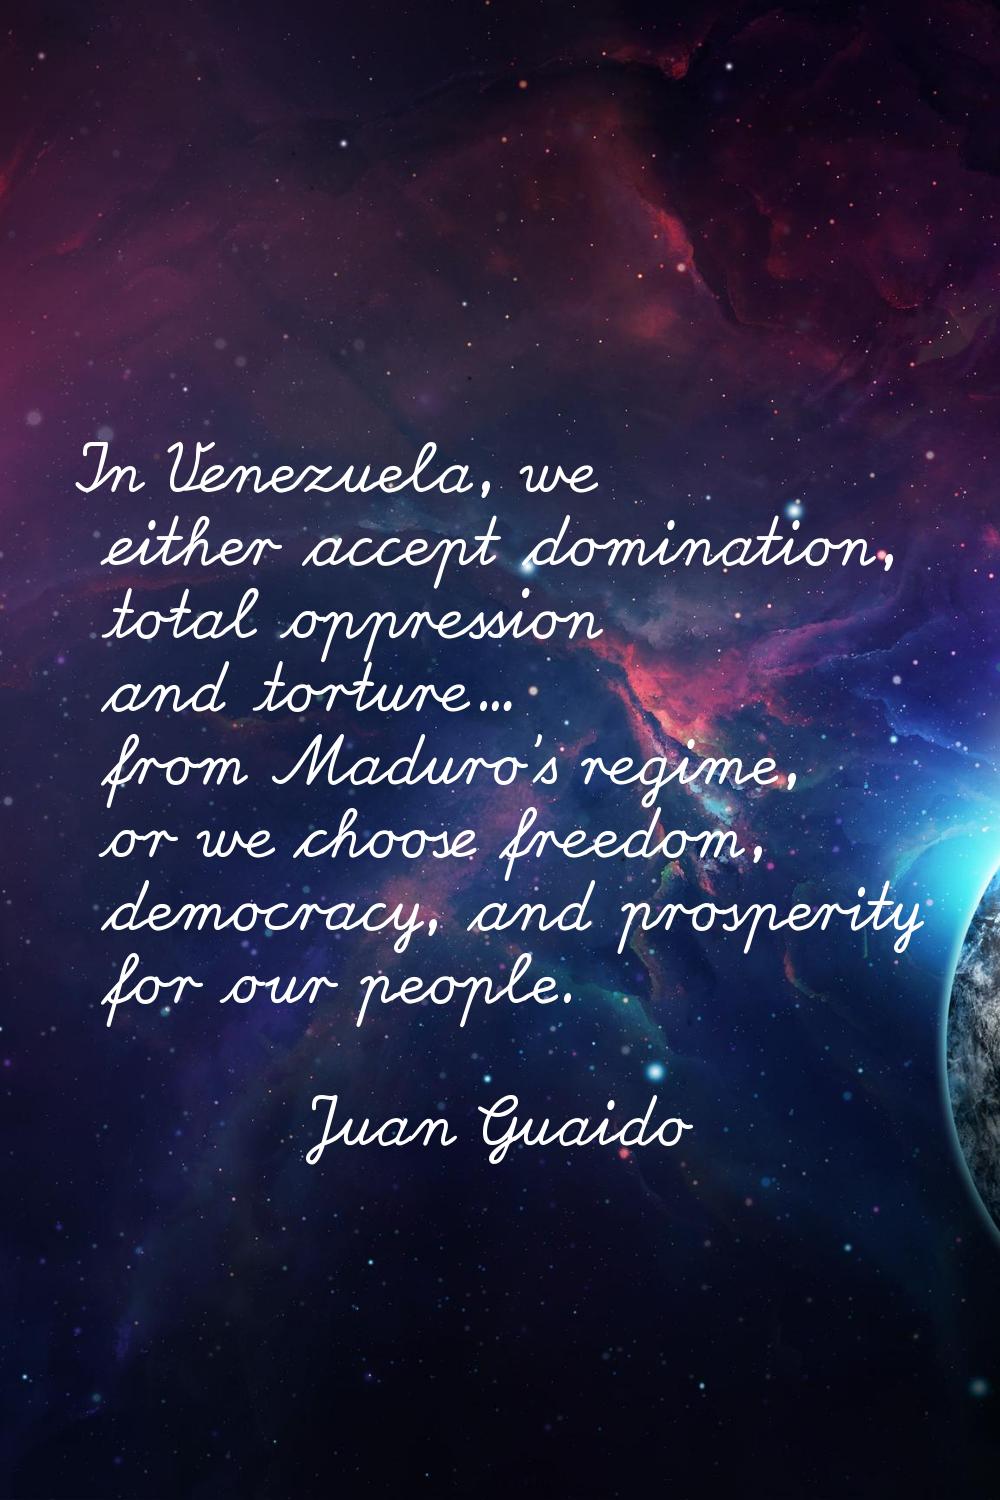 In Venezuela, we either accept domination, total oppression and torture... from Maduro's regime, or